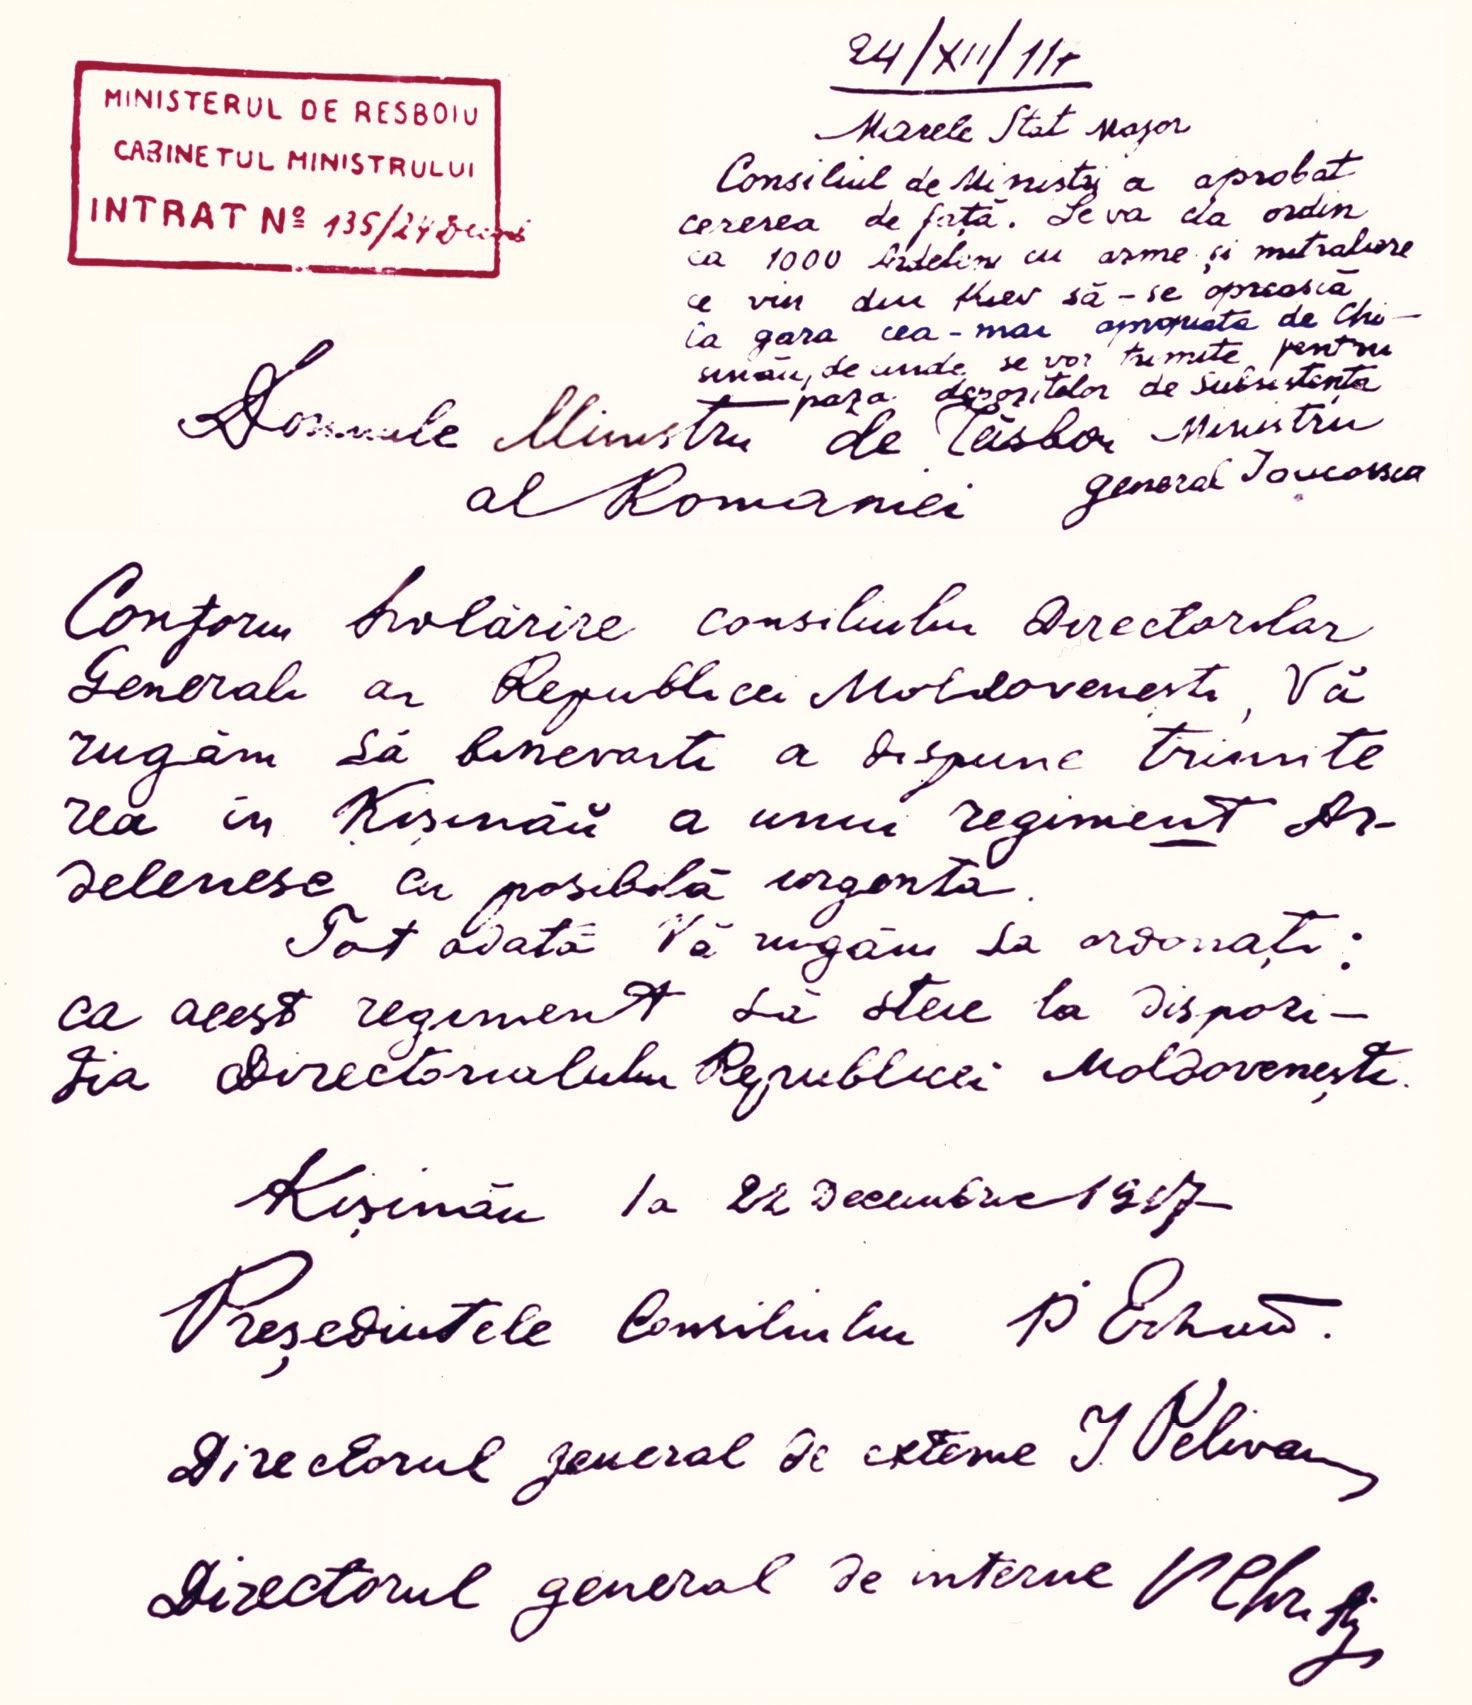 Request from the Government of the Republic of Moldova, addressed to the Minister of War of Romania, to send Emergency Army Over Prut, December 24, 1917 (National Archives of Romania, ANR)